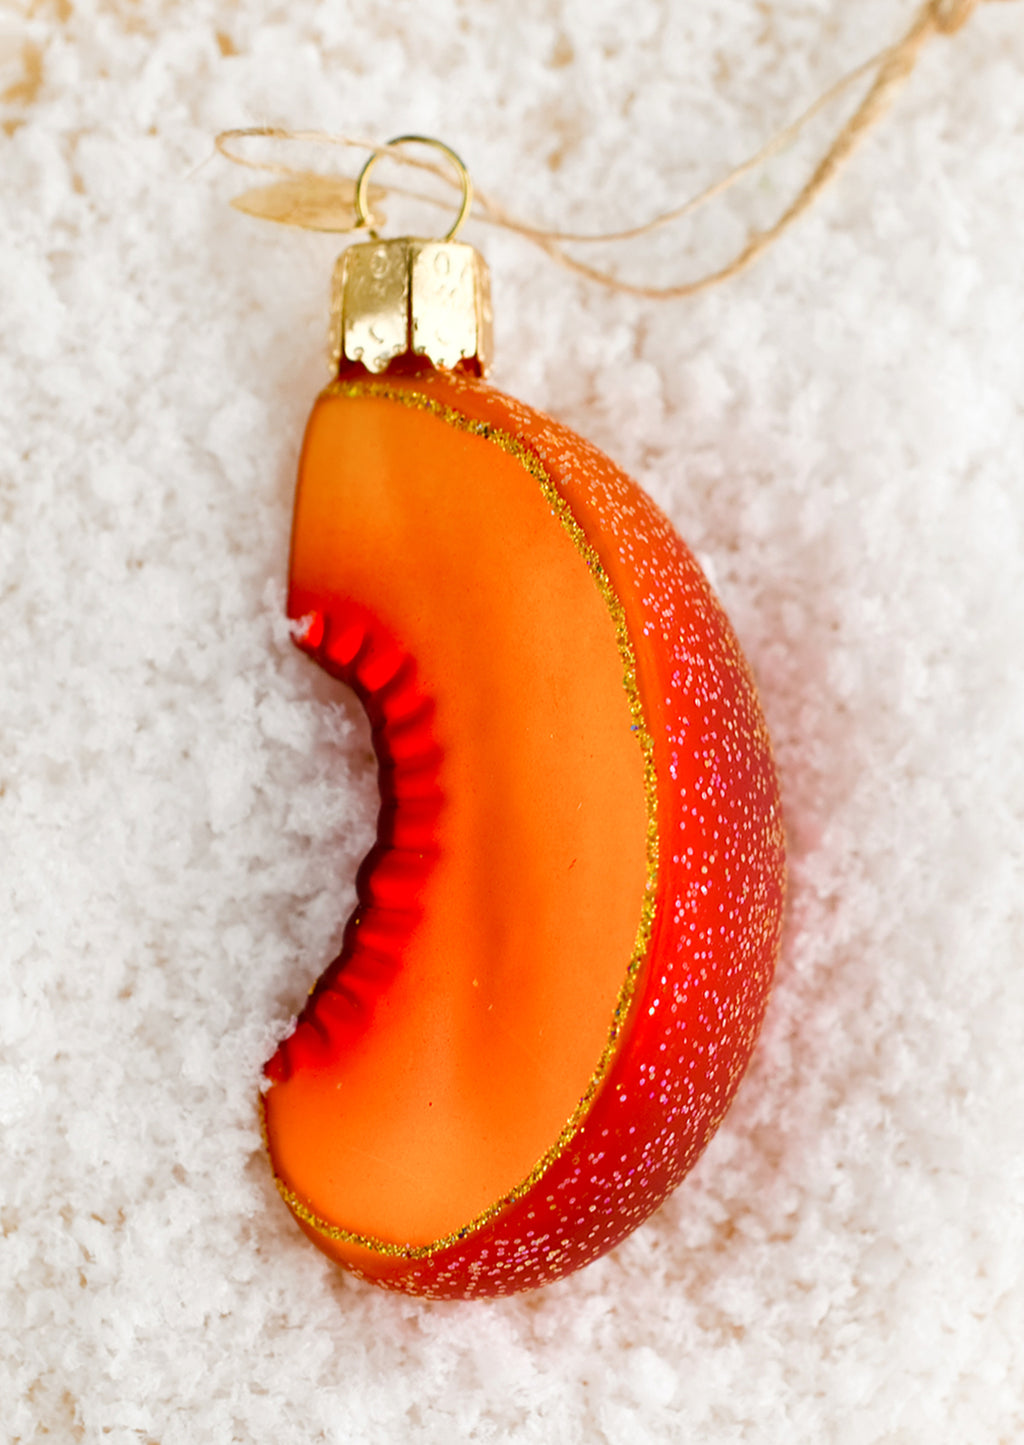 2: A glass ornament in the shape of a sliced peach.